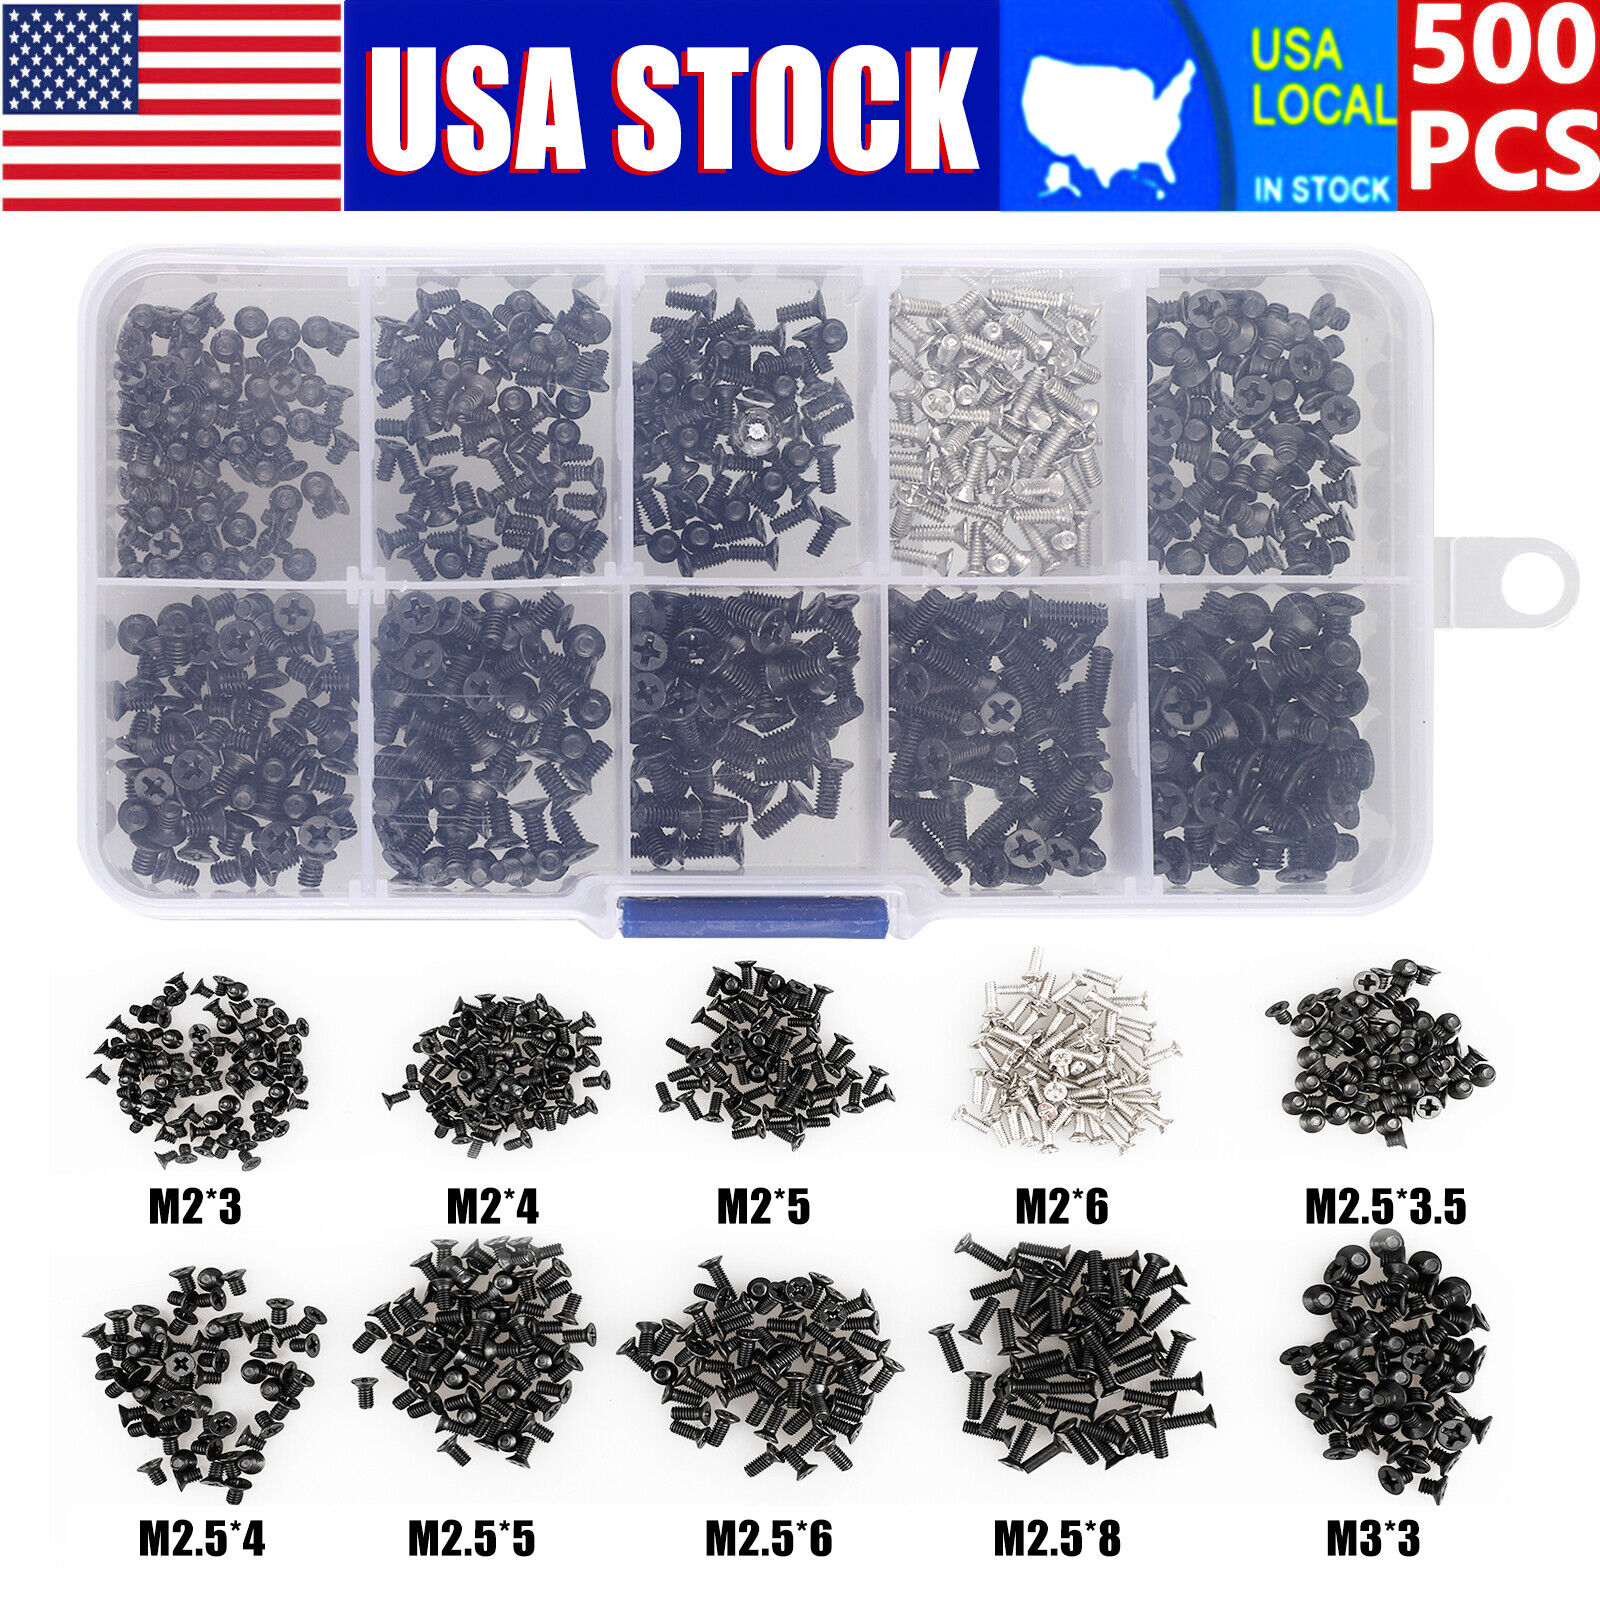 500Pcs Set Laptop Computer Screws Set For HP Dell Lenovo Sony Toshiba SAMSUNG US Ombar Does Not Apply